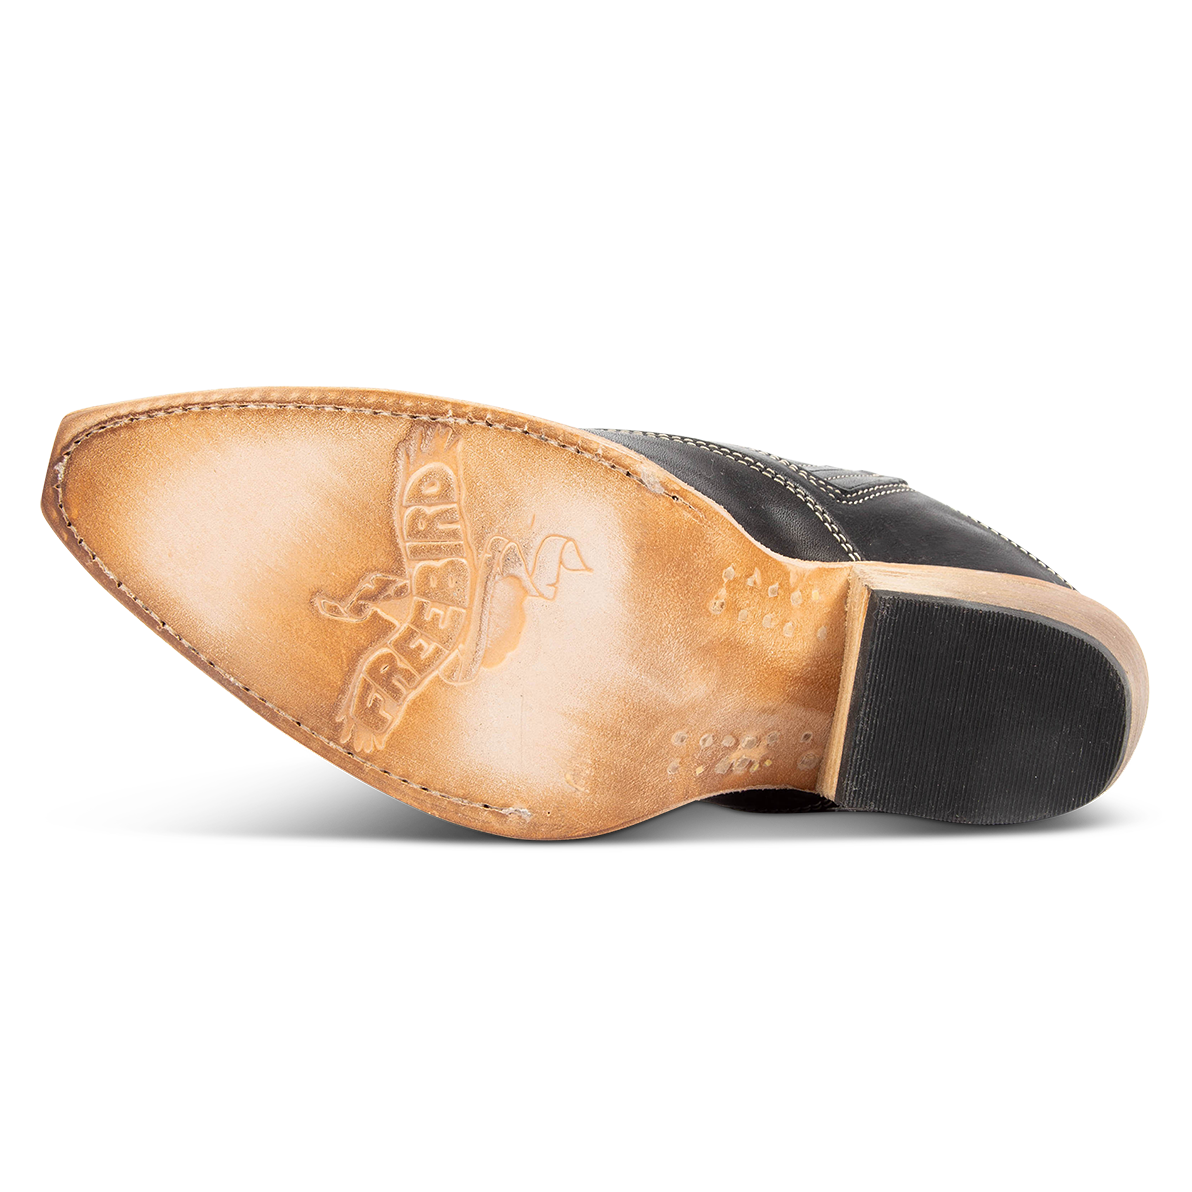 Leather sole imprinted with FREEBIRD on women's Wentworth black western mule